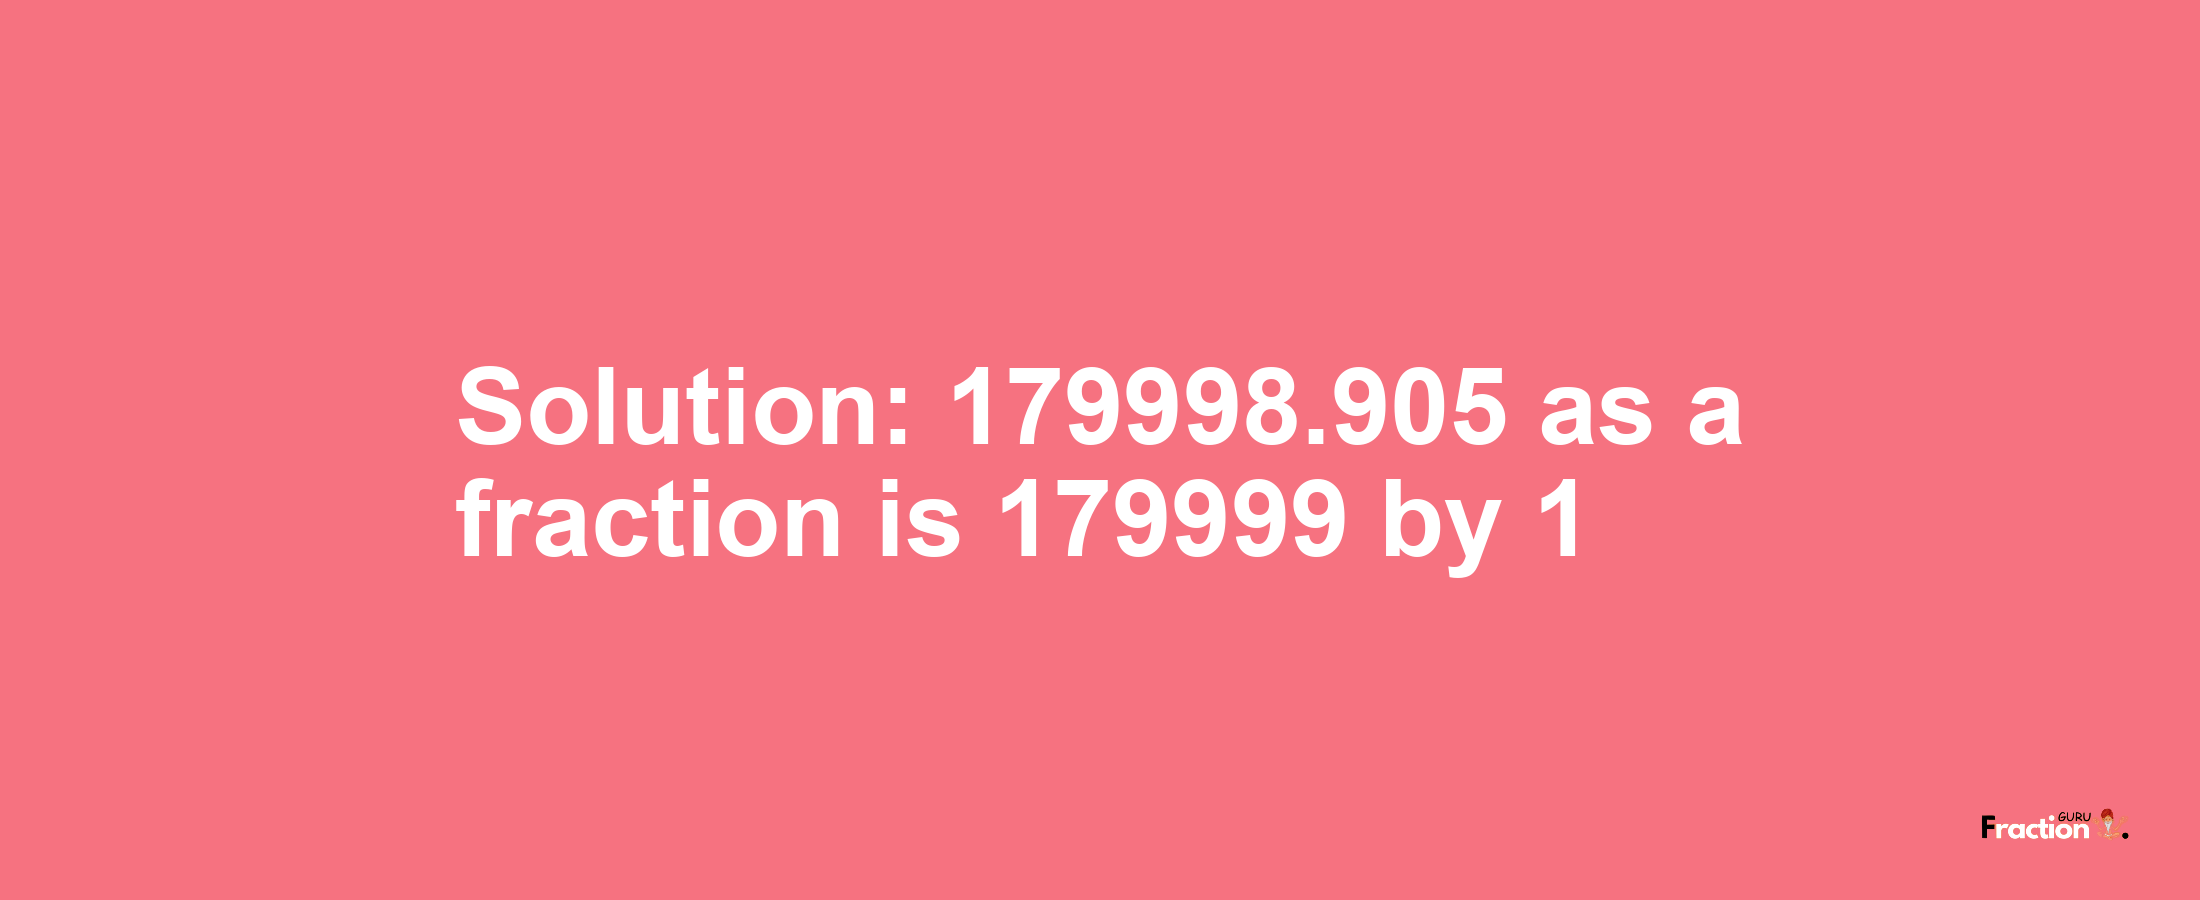 Solution:179998.905 as a fraction is 179999/1